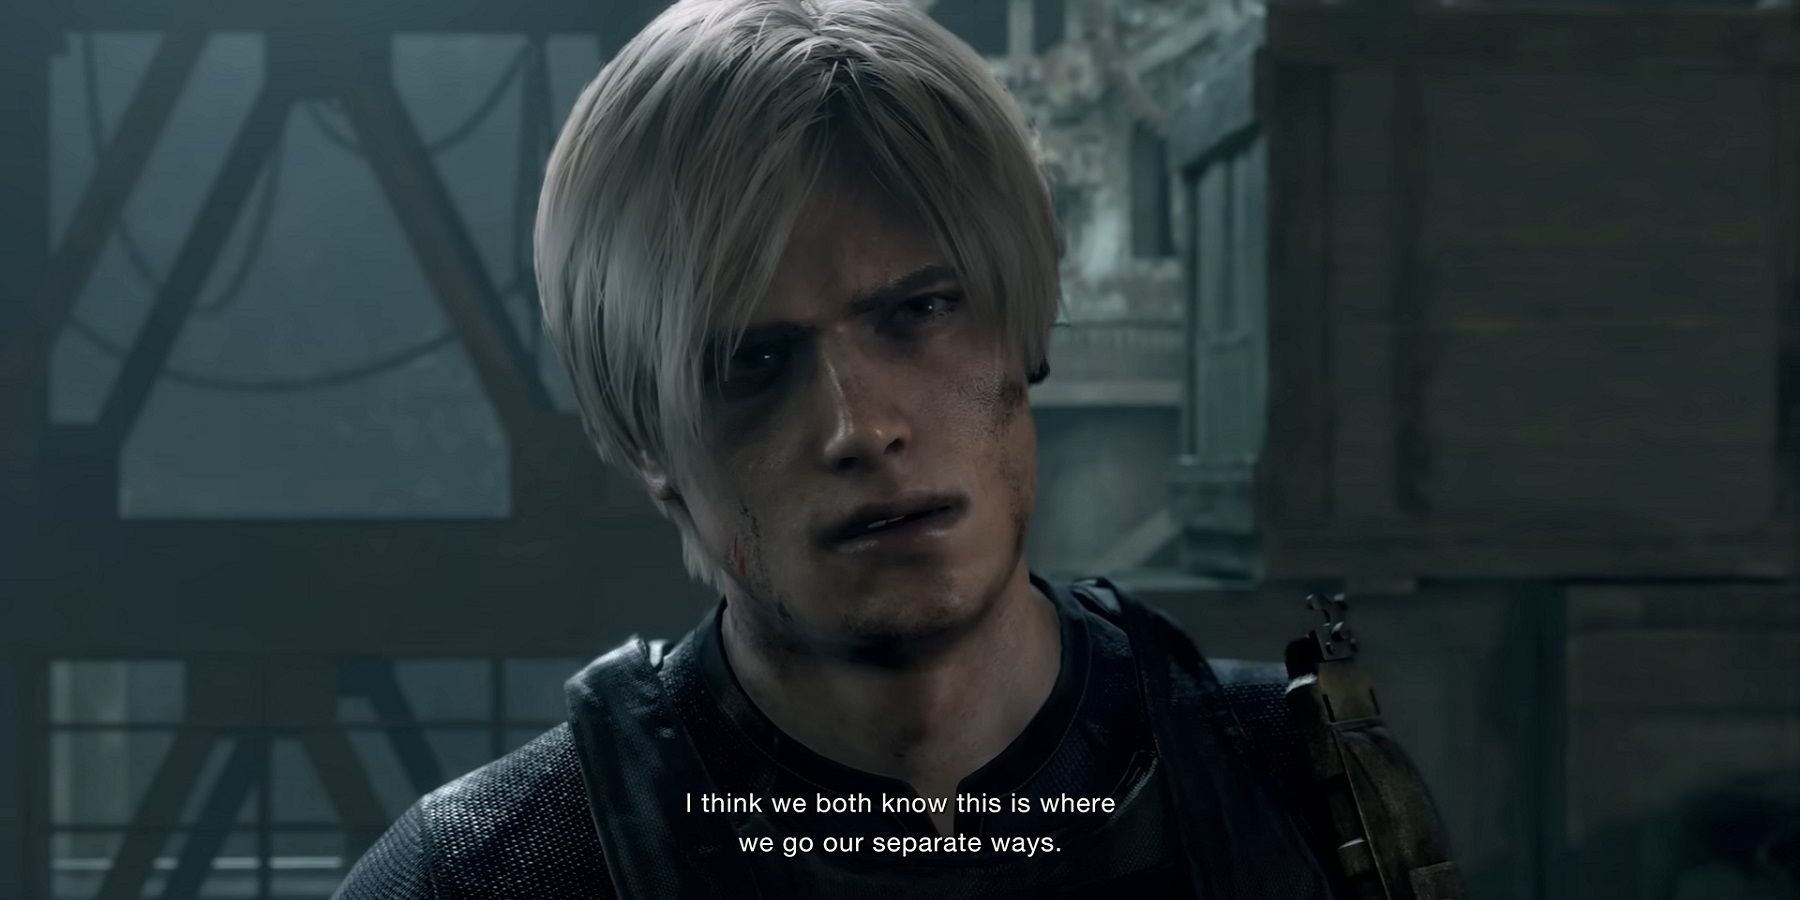 Leon separating from Ada in Resident Evil 4.